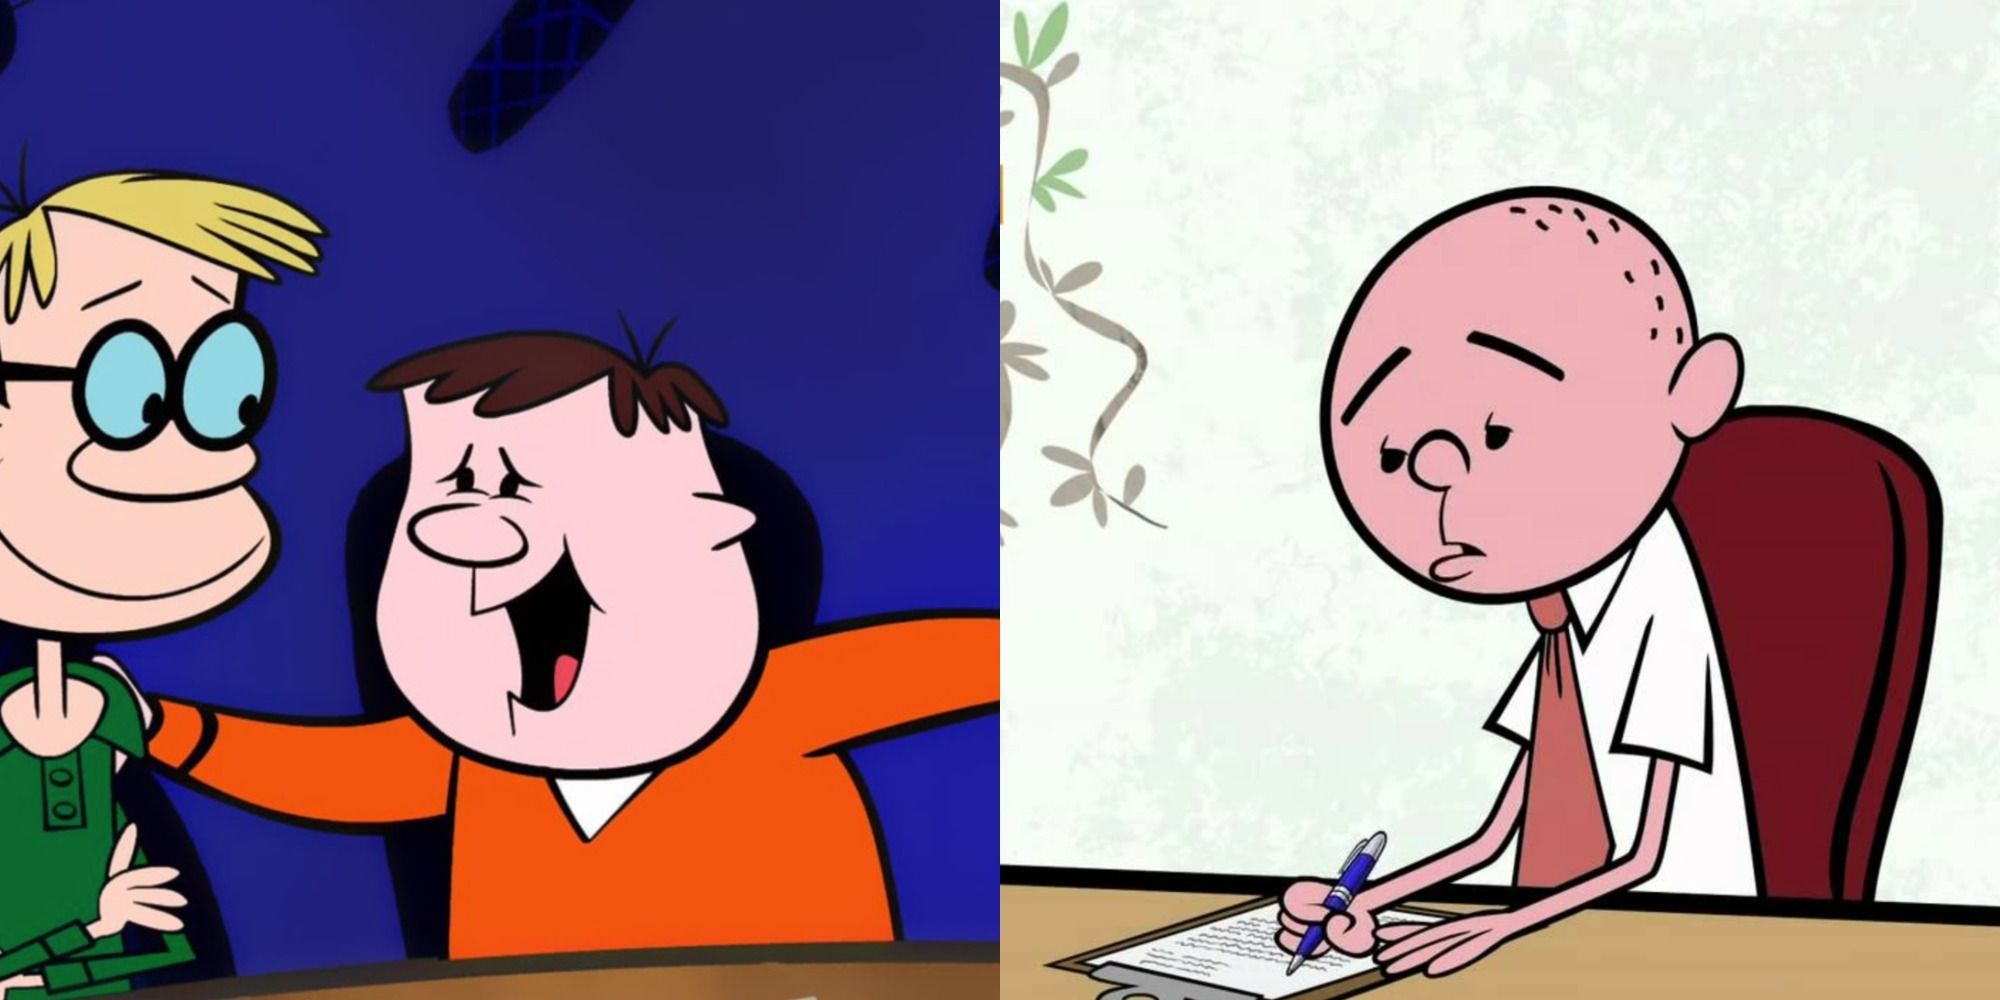 Two side by side images of Karl, Ricky and Steve on the Ricky Gervais Show